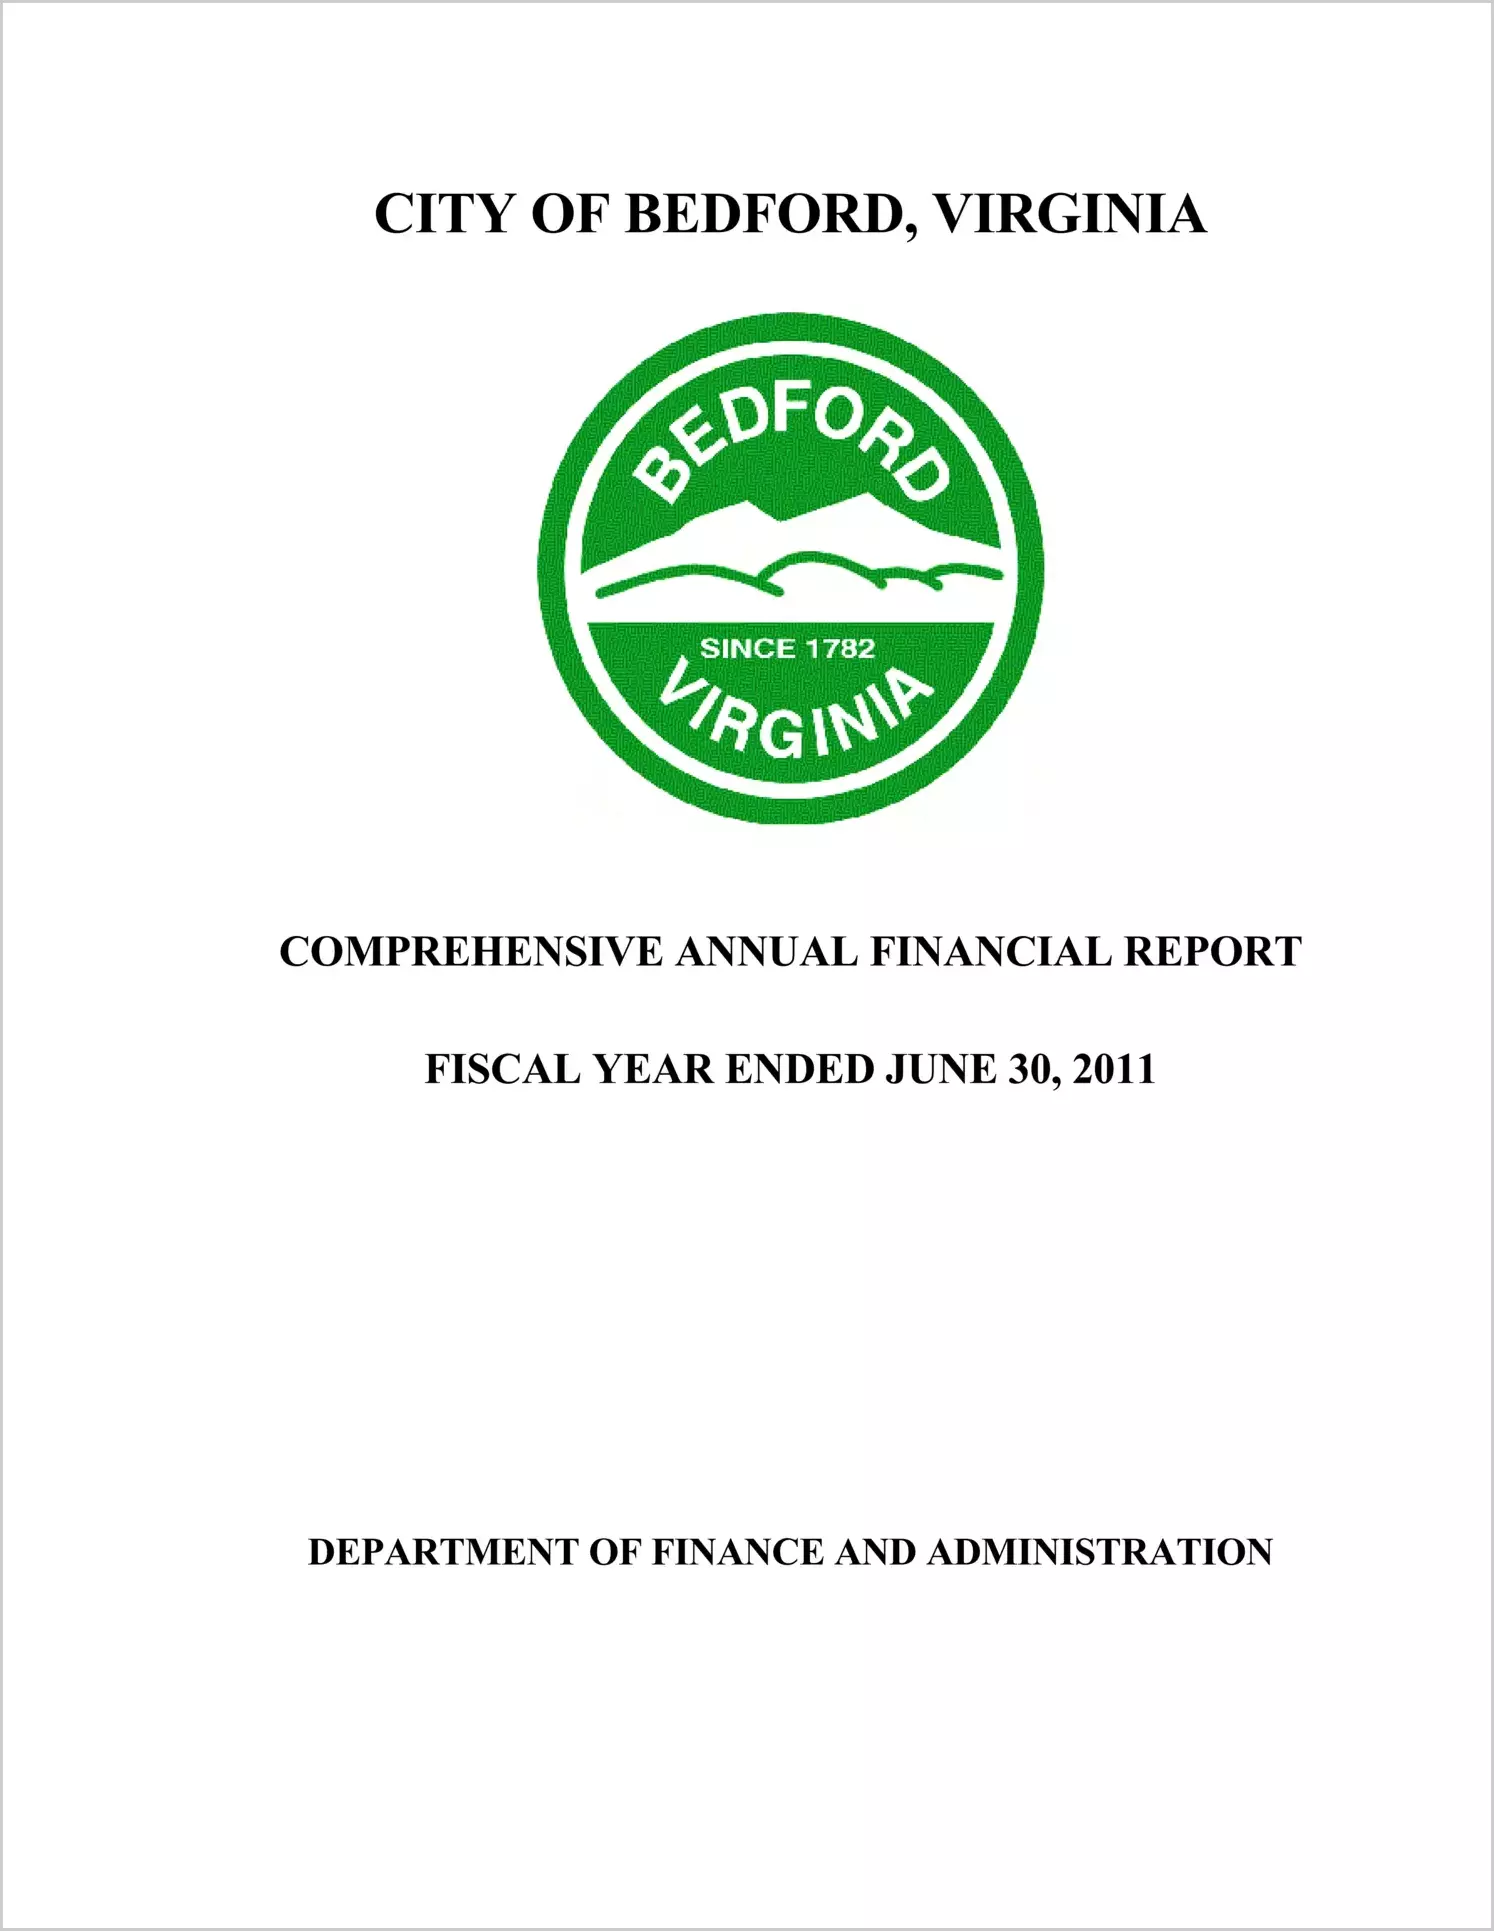 2011 Annual Financial Report for City of Bedford